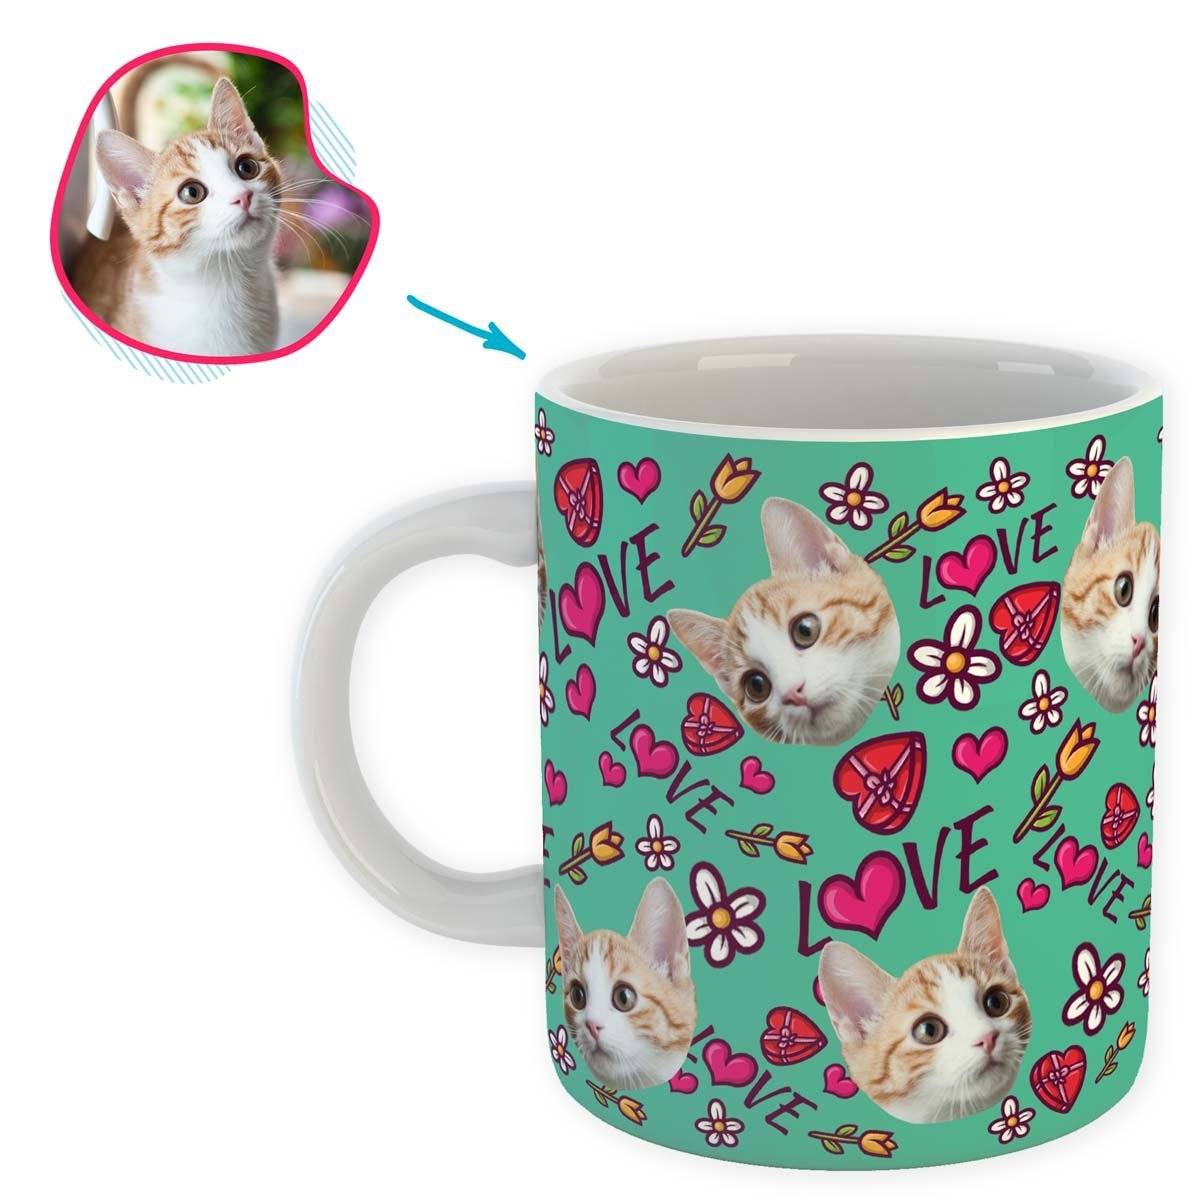 mint Hearts and Flowers mug personalized with photo of face printed on it